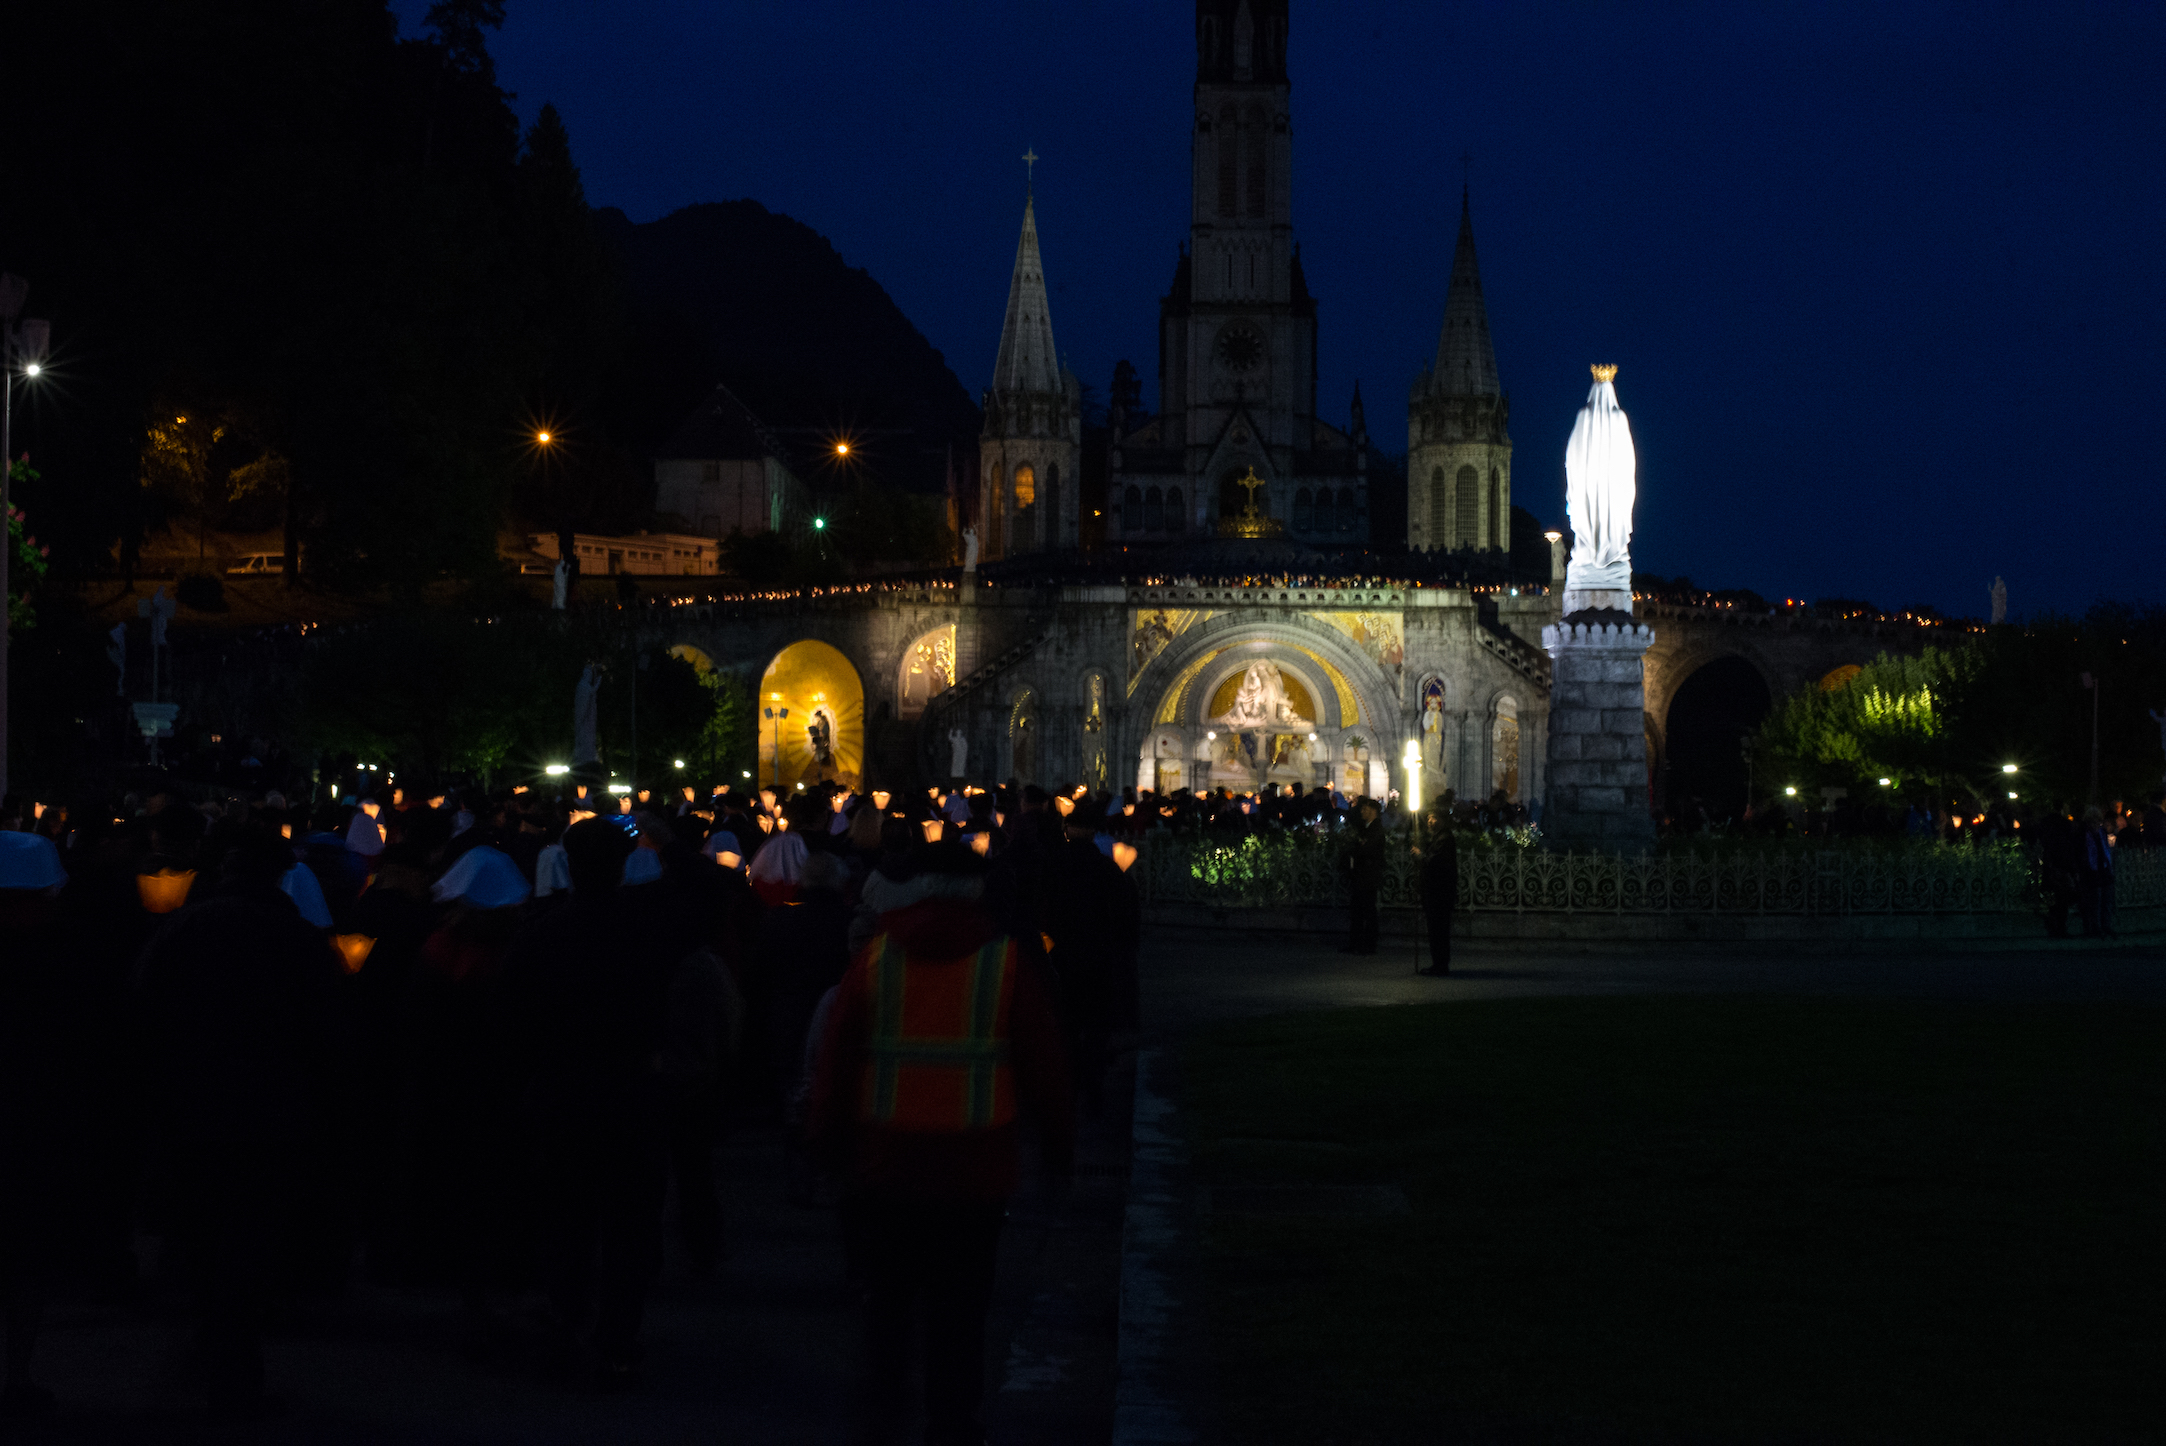 Live Mass from Lourdes dedicated to the Grand Master and the Order of Malta on 2 May